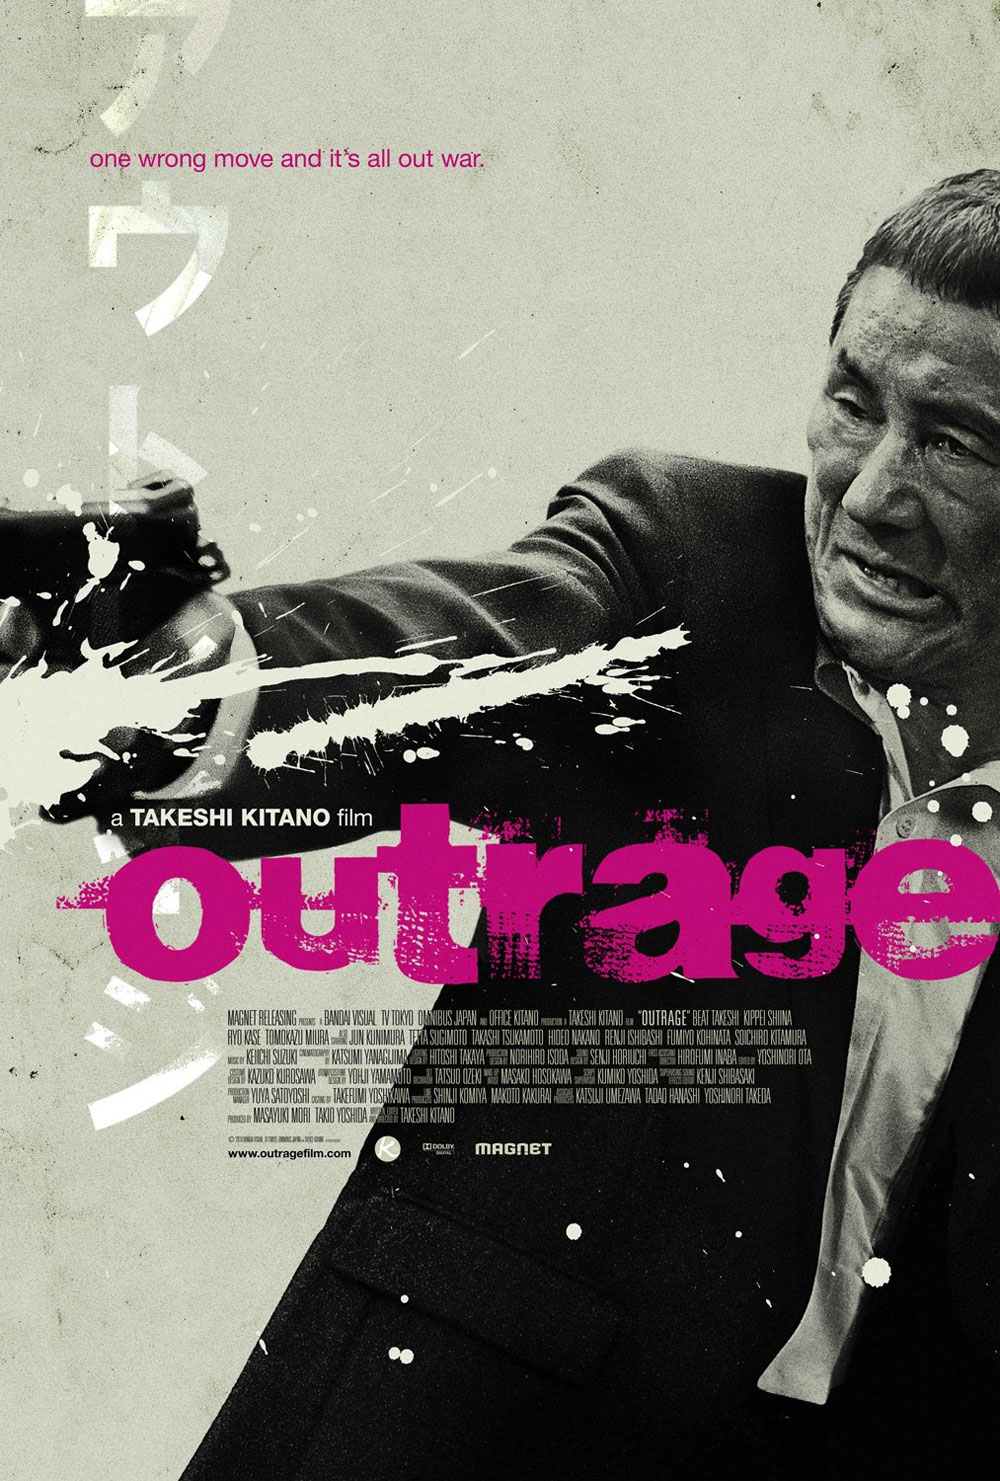 Poster Outrage